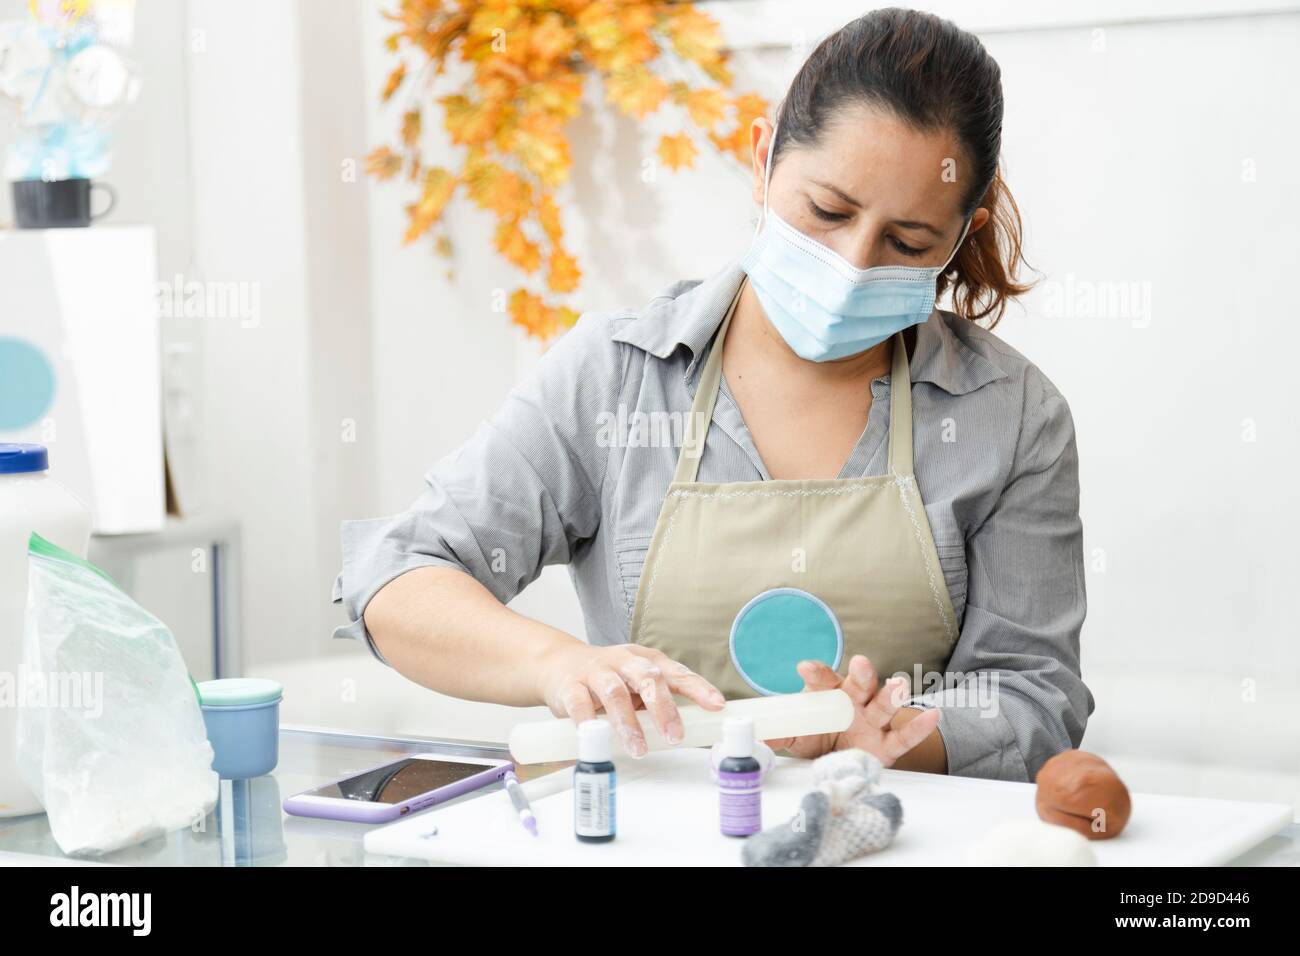 Pastry chef working with fondant to decorate a cake - Woman cooking with mask - Woman painting clay with dyes Stock Photo